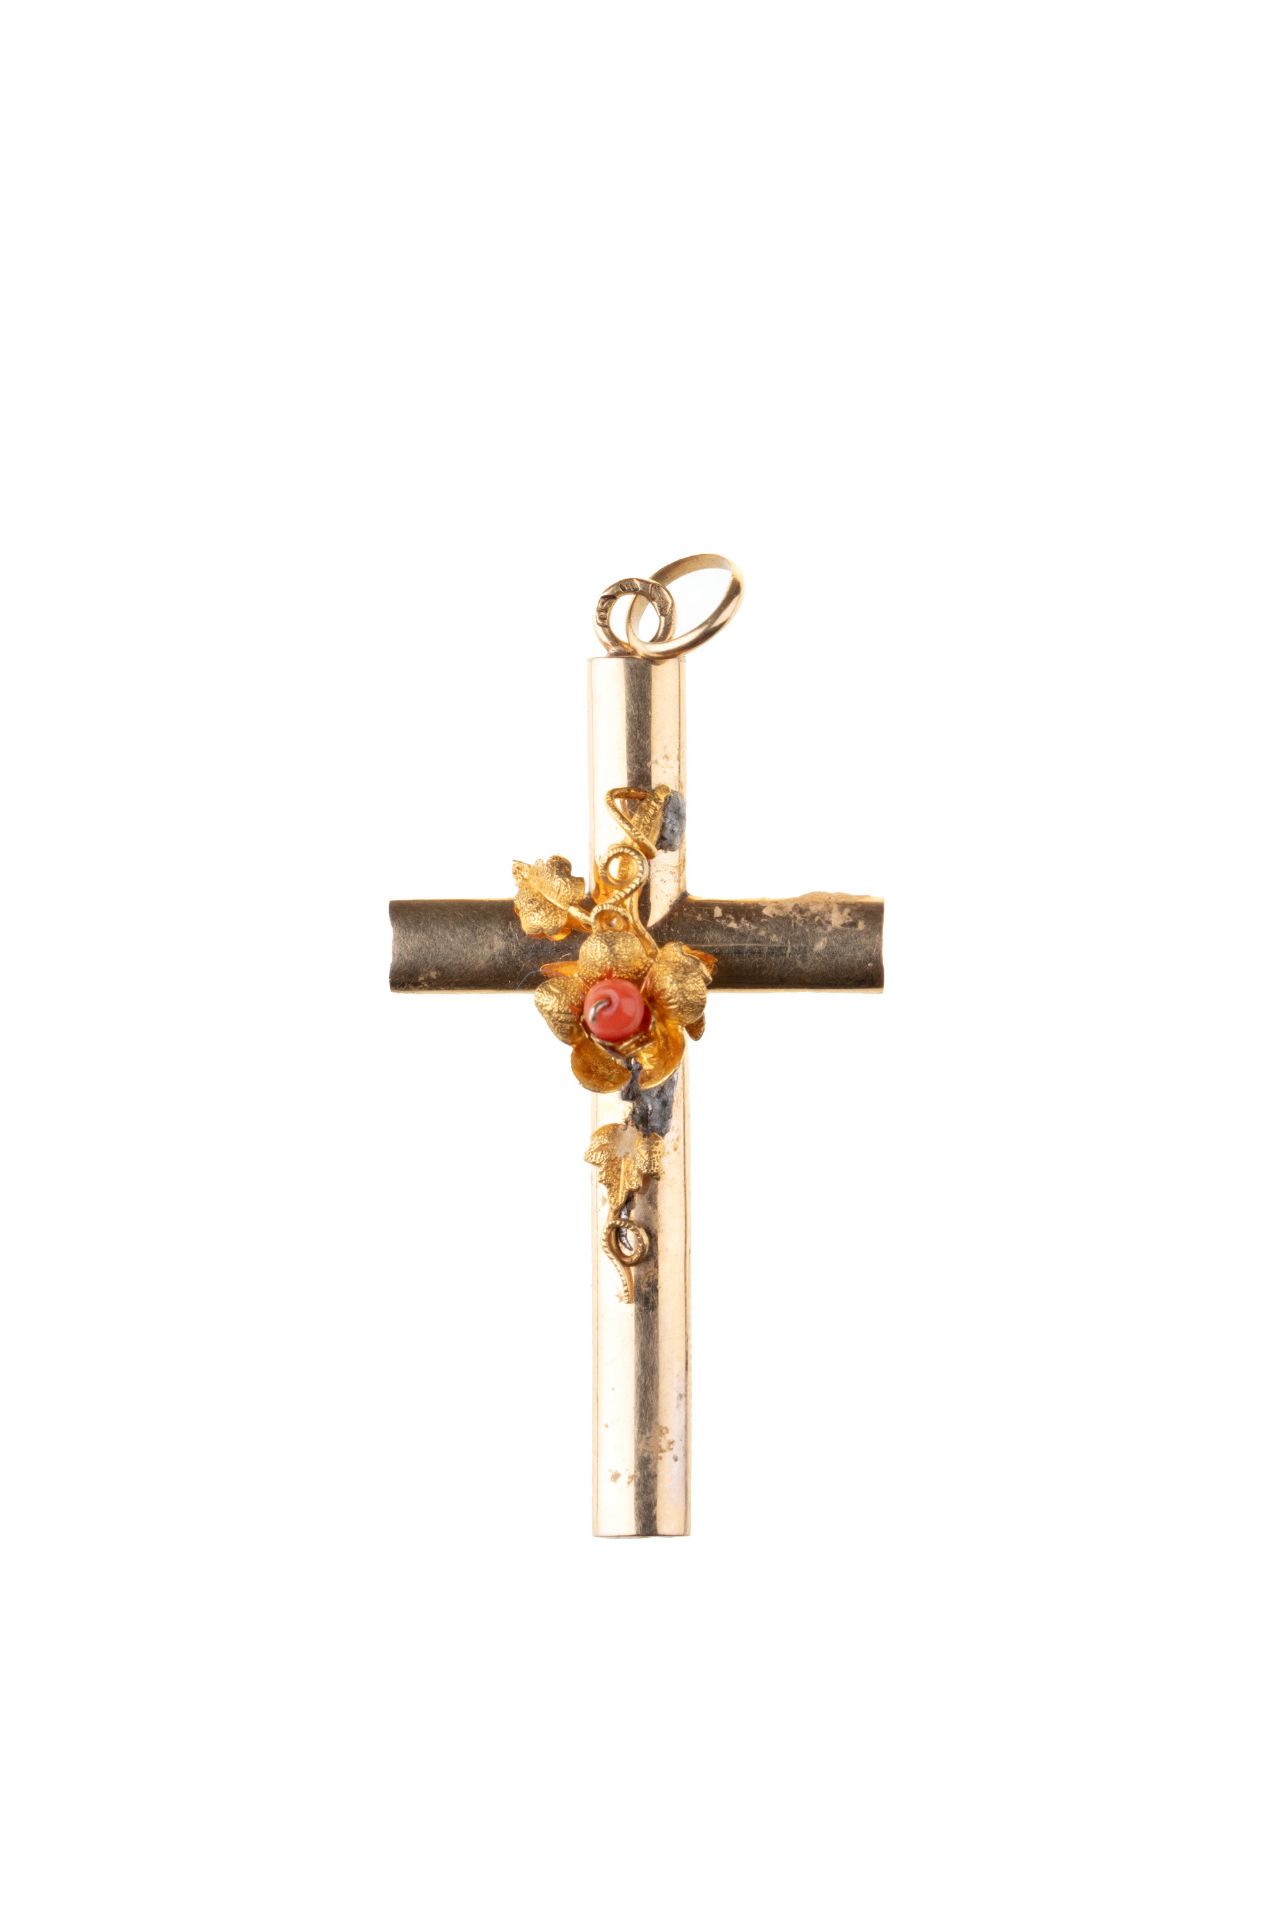 GOLDEN CROSS WITH CORAL | Central Europe (Central European / Central Europe - around 1900)